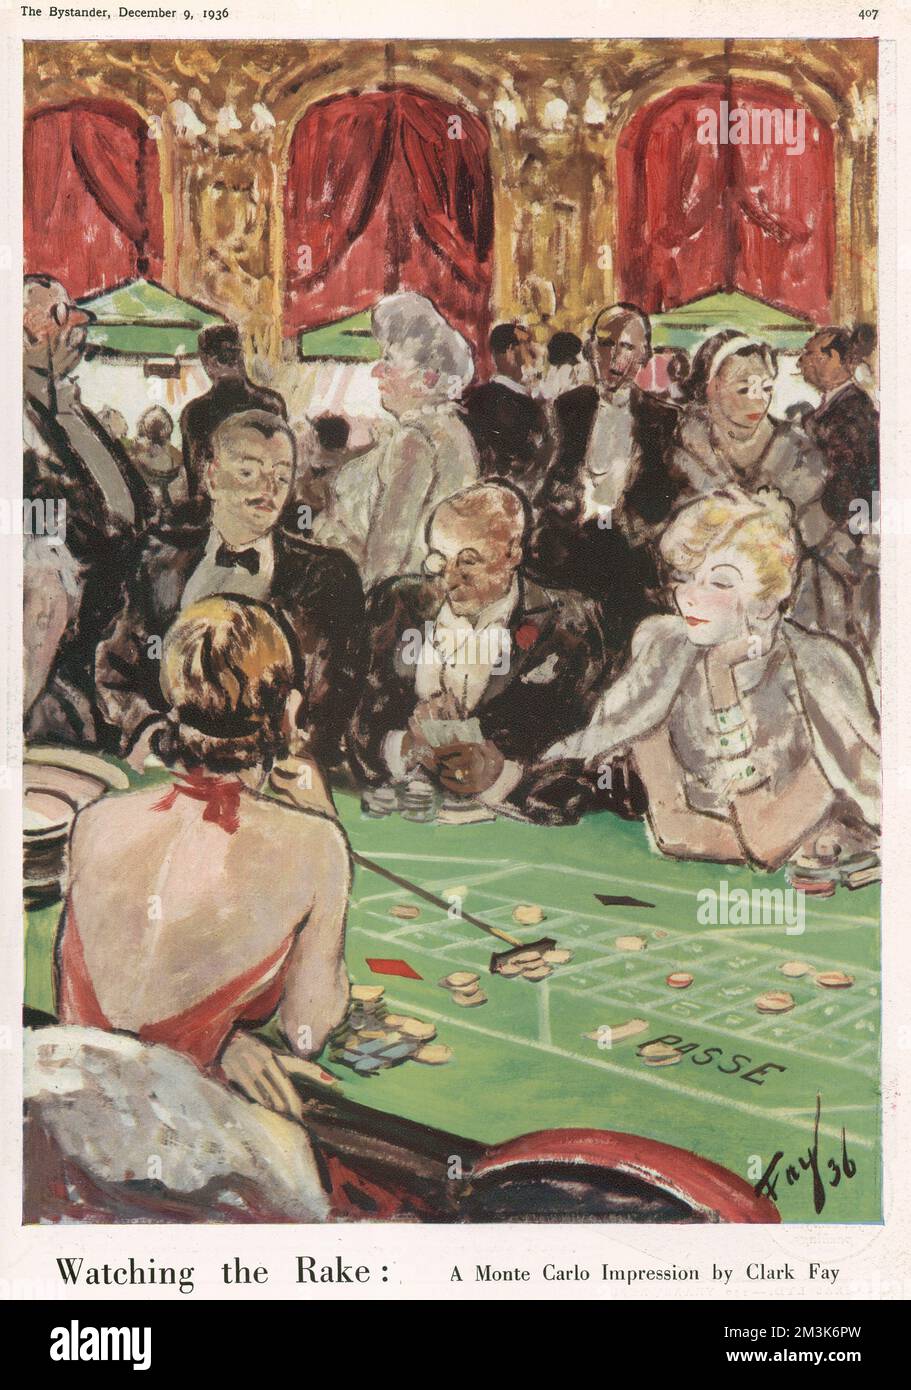 An impression of the casino at Monte Carlo by Clark Fay. Glamorous socialites playing at the roulette table.     Date: 9th December 1936 Stock Photo